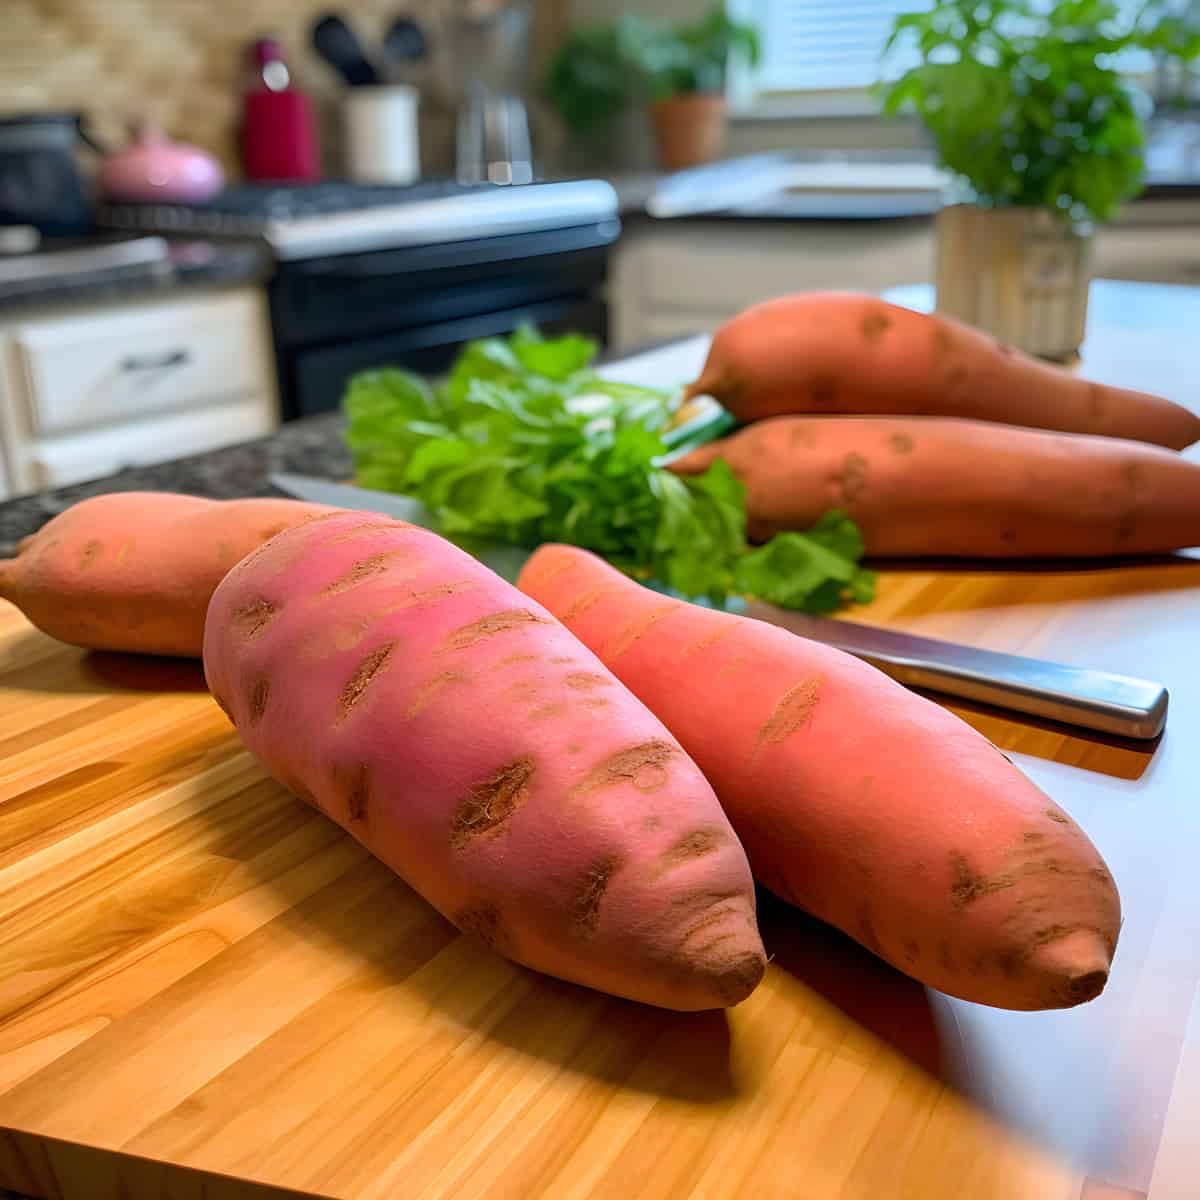 Scarlet Sweet Potatoes on a kitchen counter